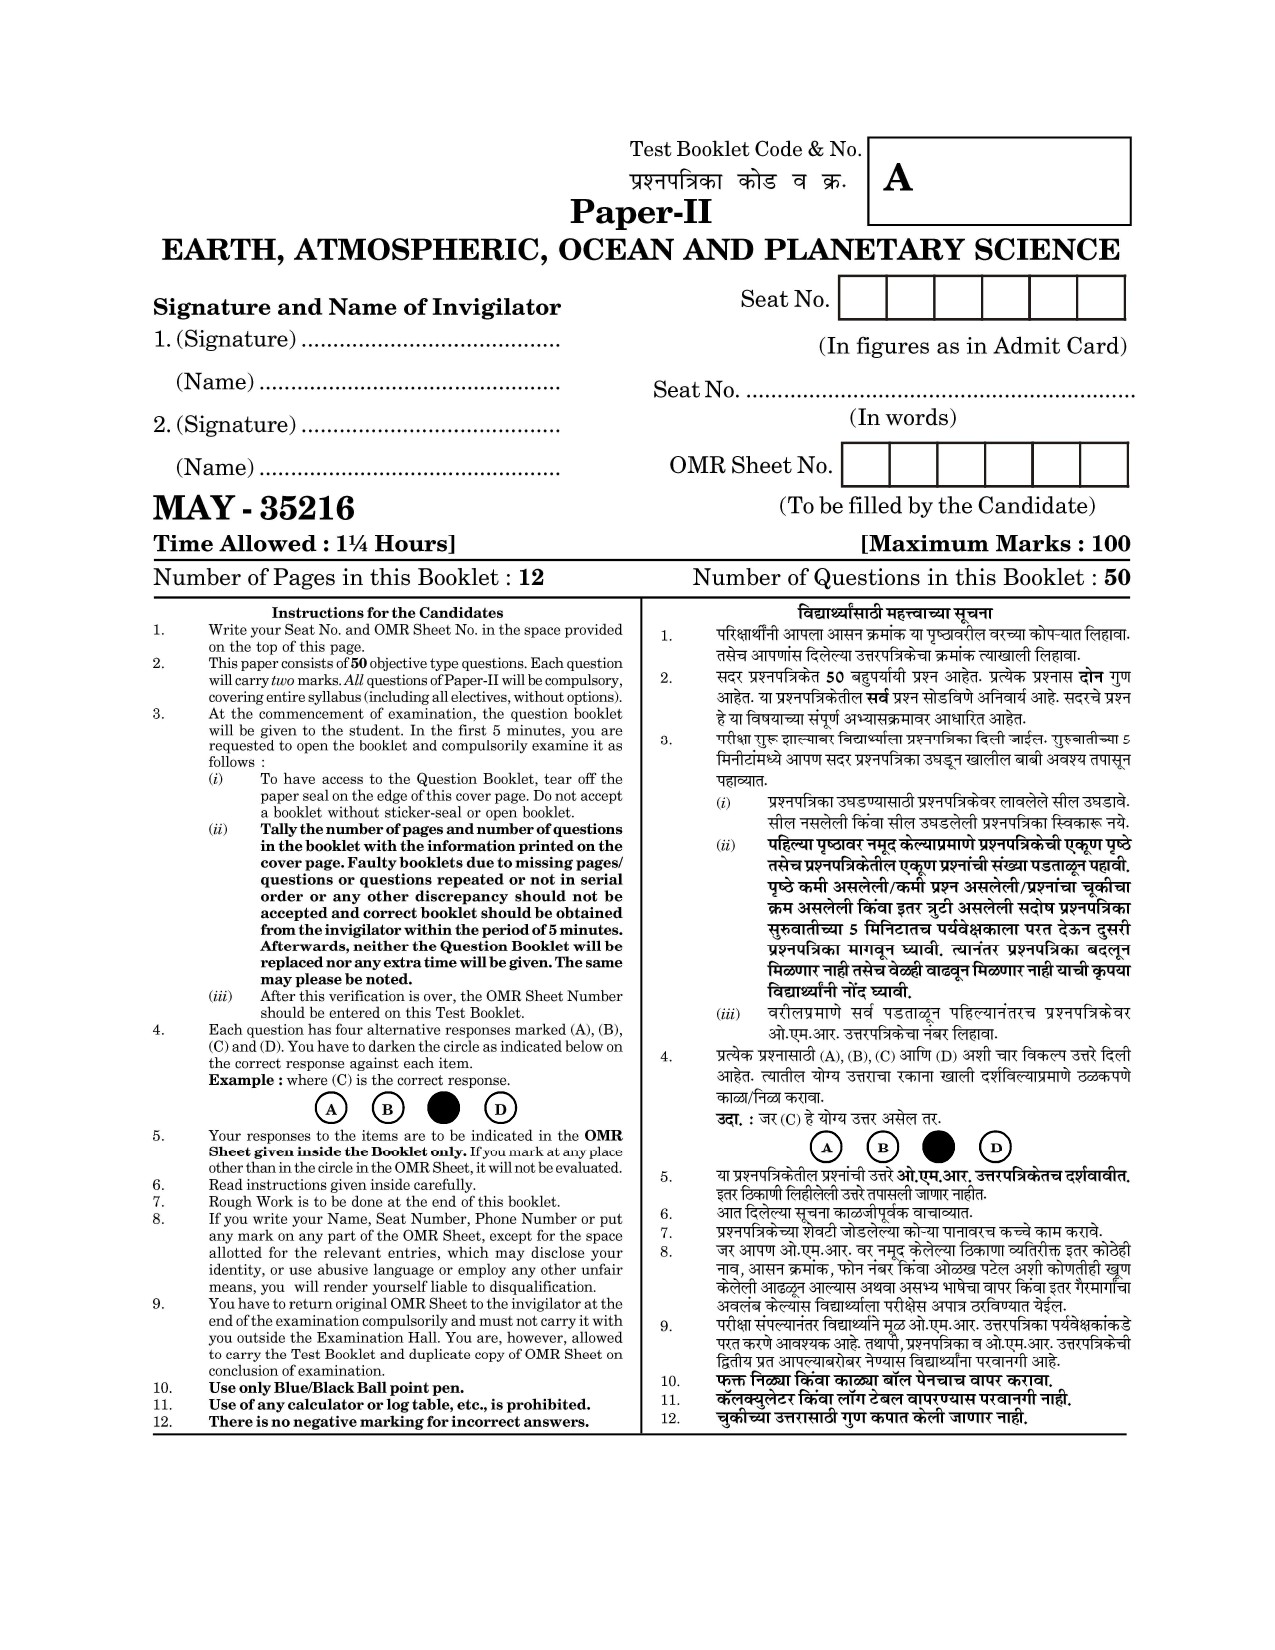 Maharashtra SET Earth Atmospheric Ocean Planetary Science Question Paper II May 2016 1